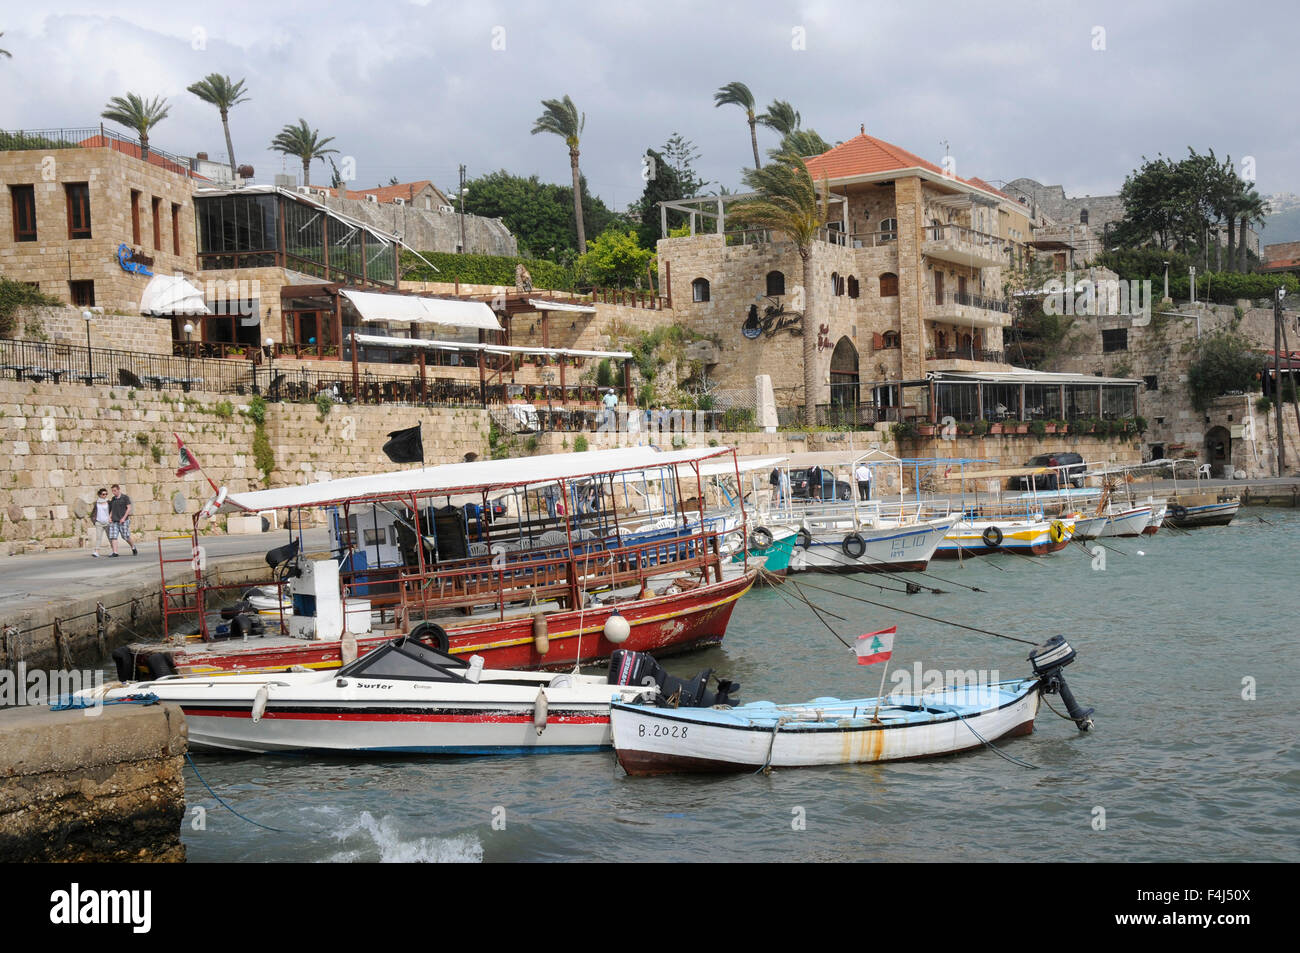 Boats in the harbour of the old city of Byblos, UNESCO World Heritage Site, Lebanon, Middle East Stock Photo